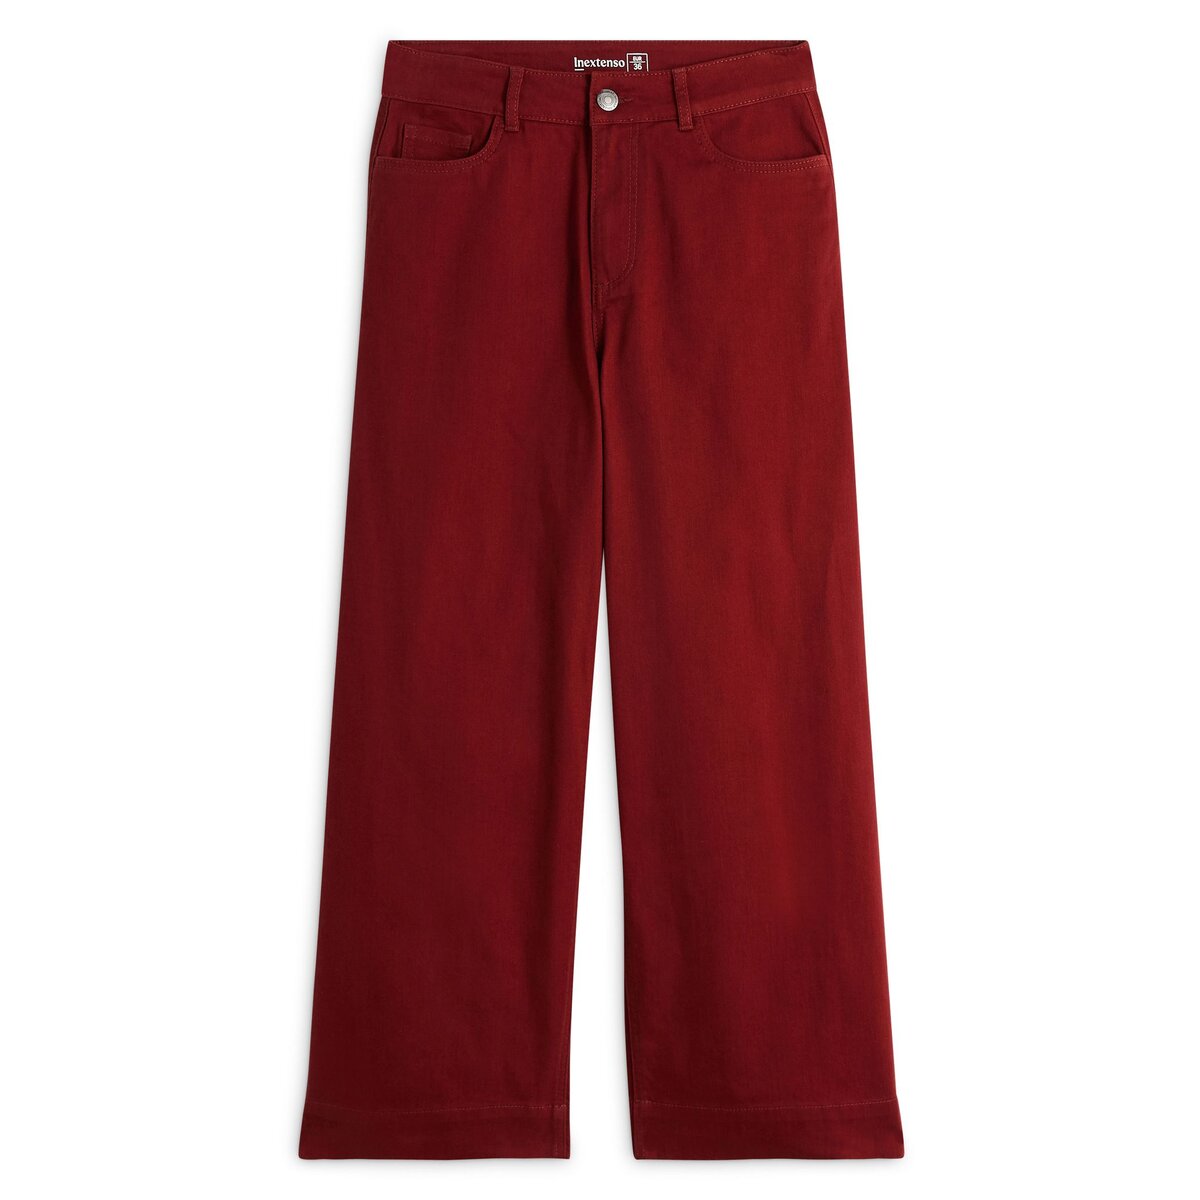 INEXTENSO Pantalon taille haute cropped rouge femme